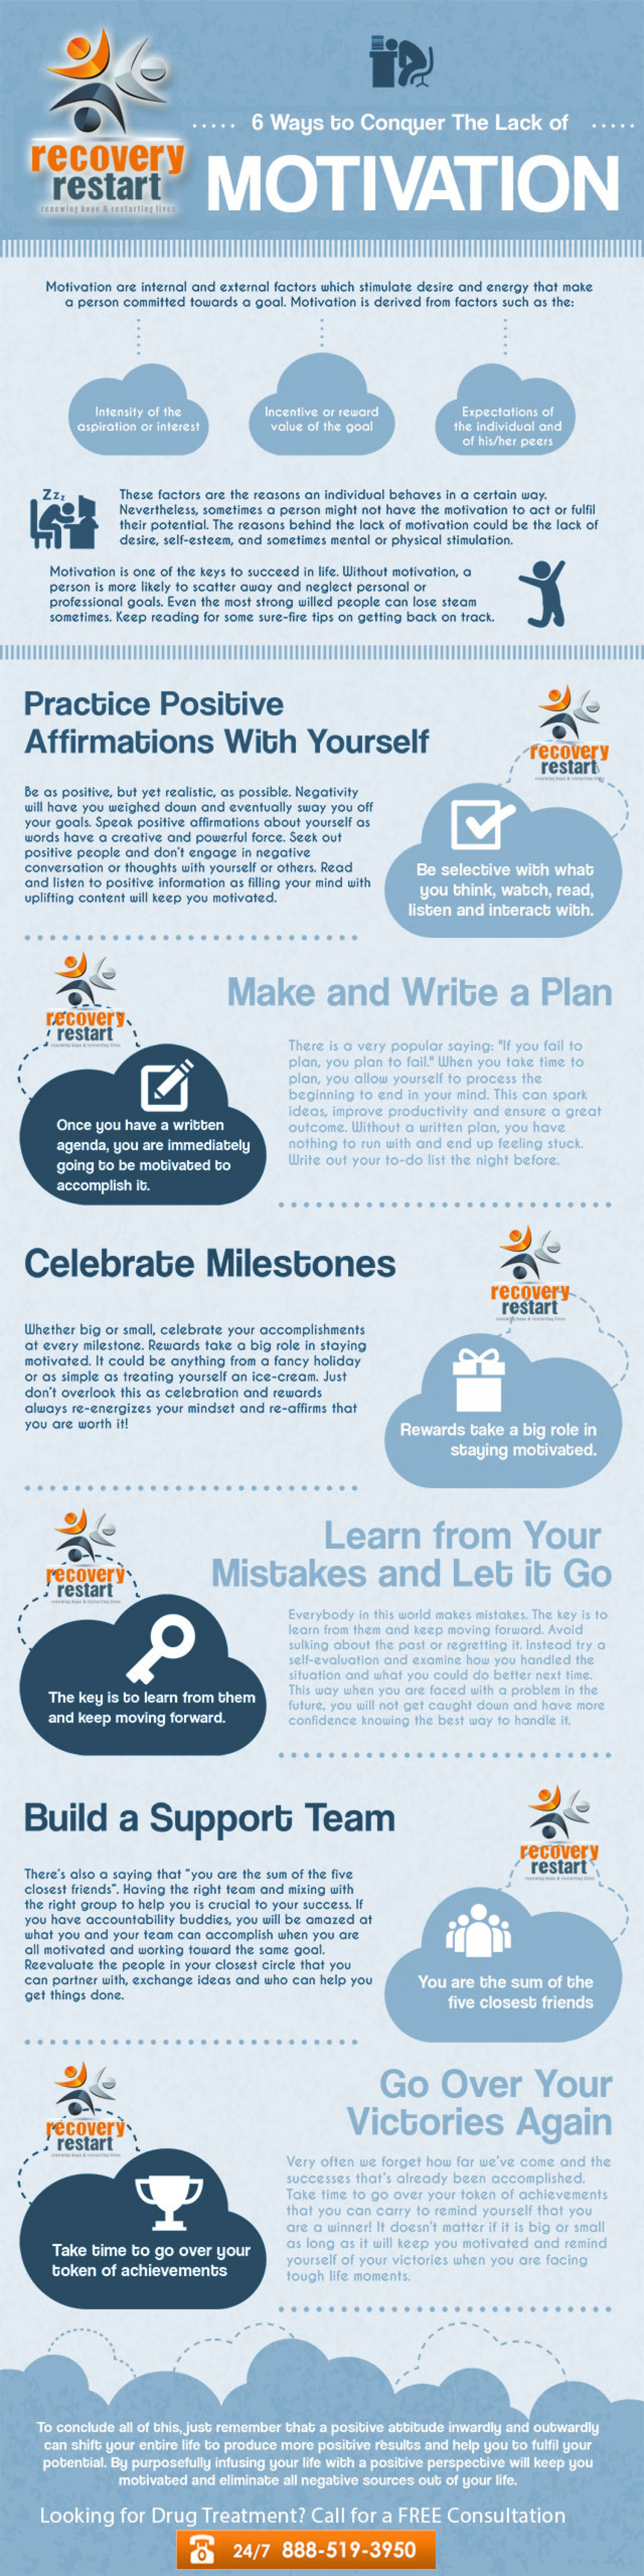 6 Ways to Conquer the Lack of Motivation Infographic